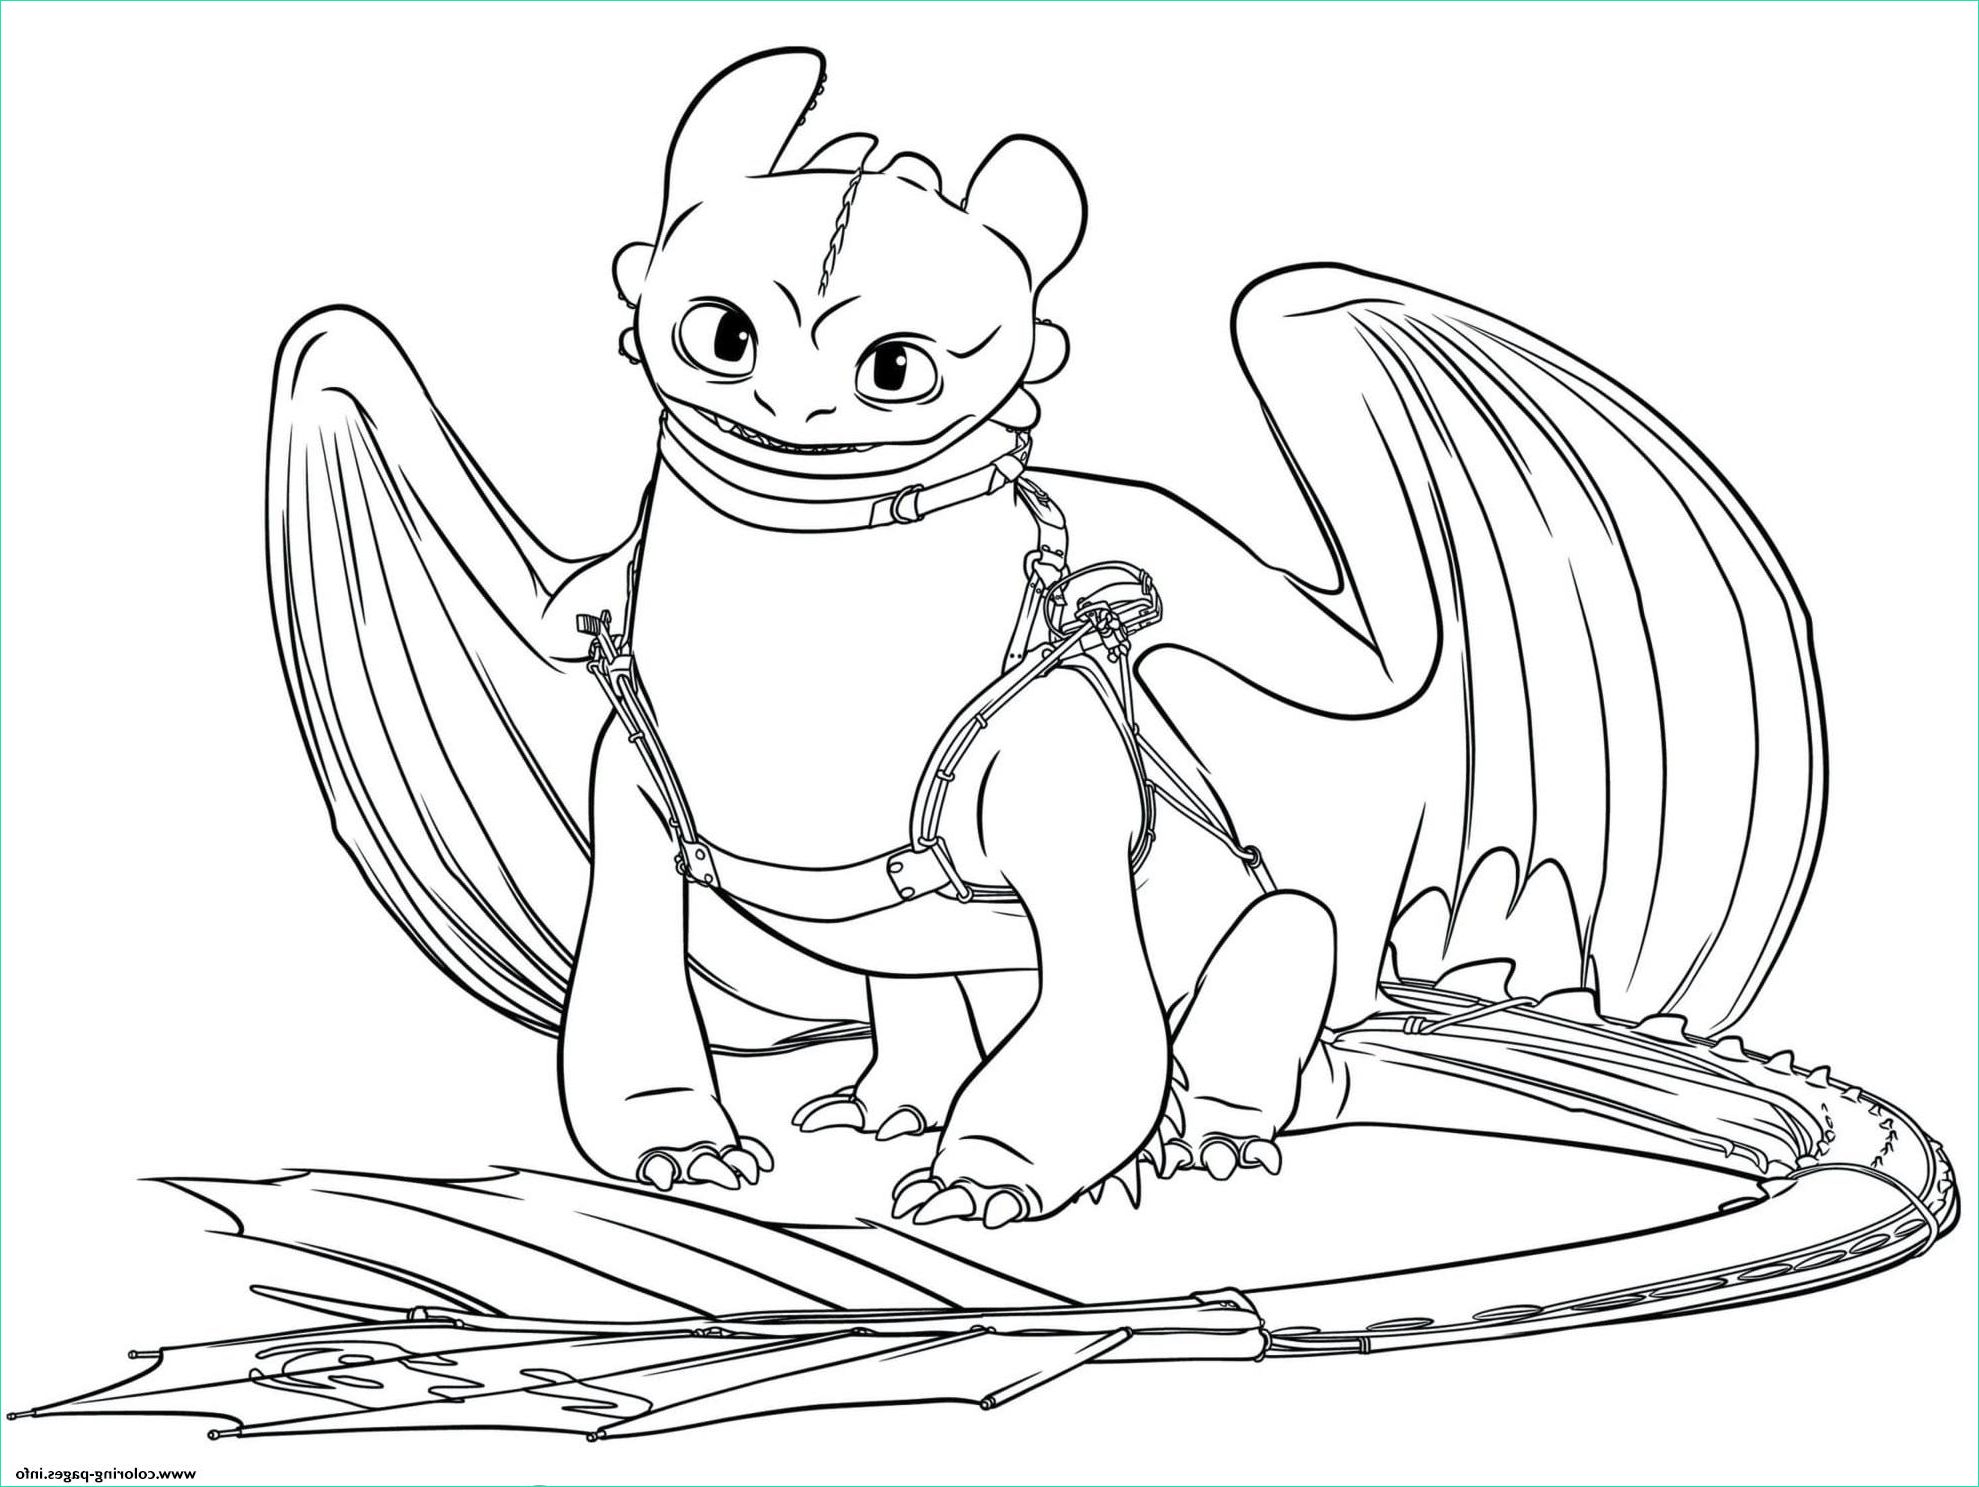 Dessin De Dragon Impressionnant Photos toothless Dragon 3 Coloring Pages Printable